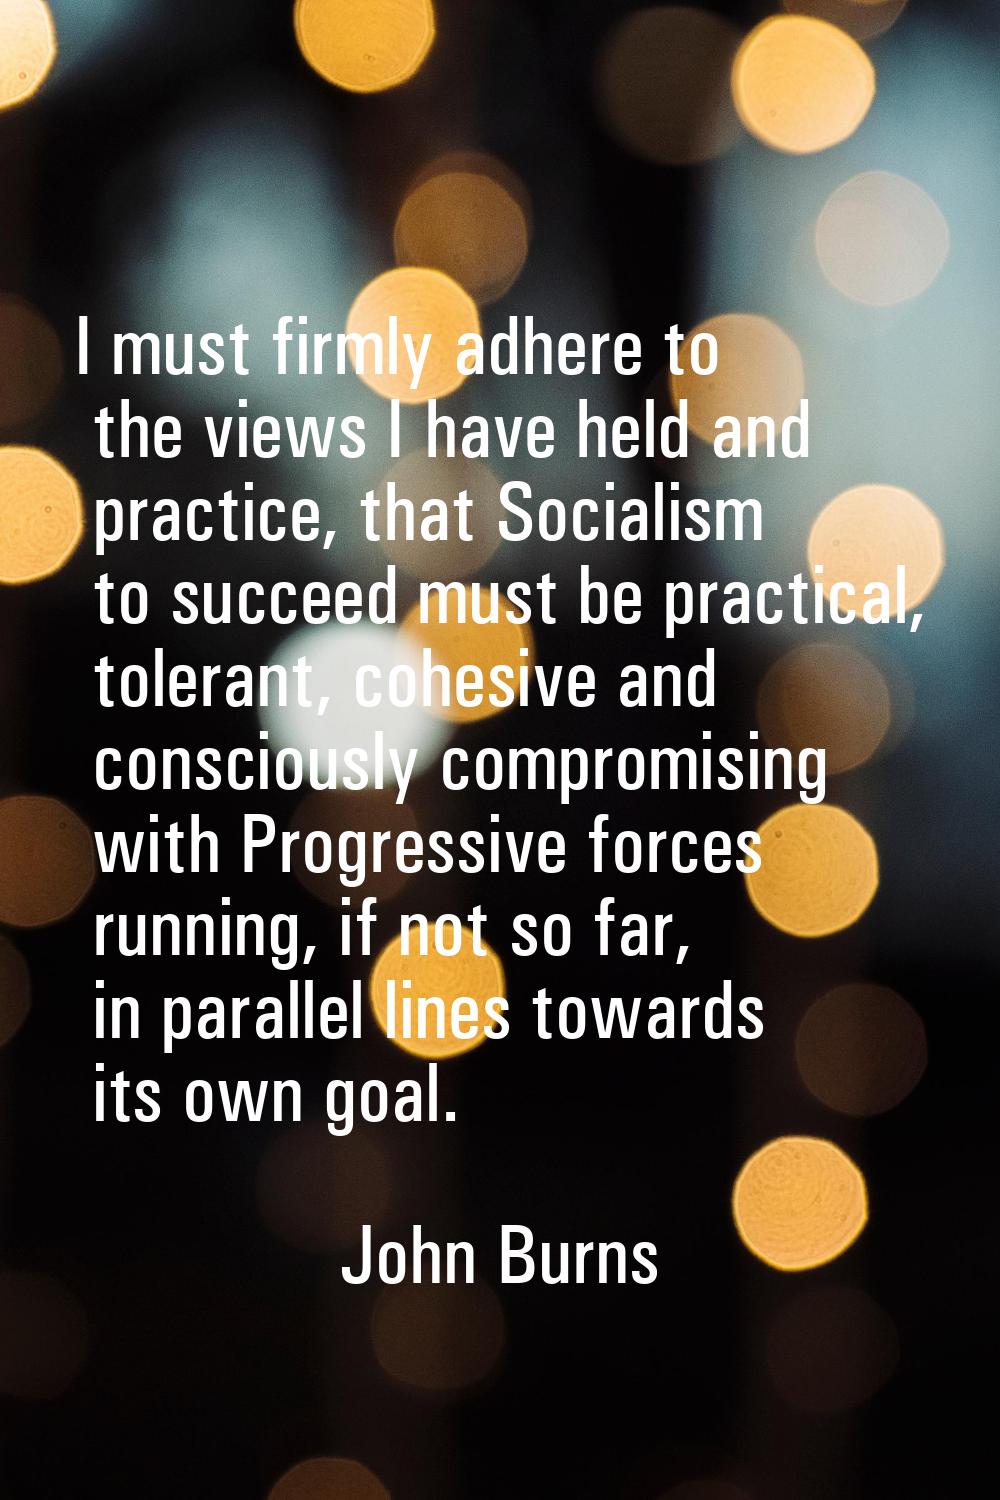 I must firmly adhere to the views I have held and practice, that Socialism to succeed must be pract